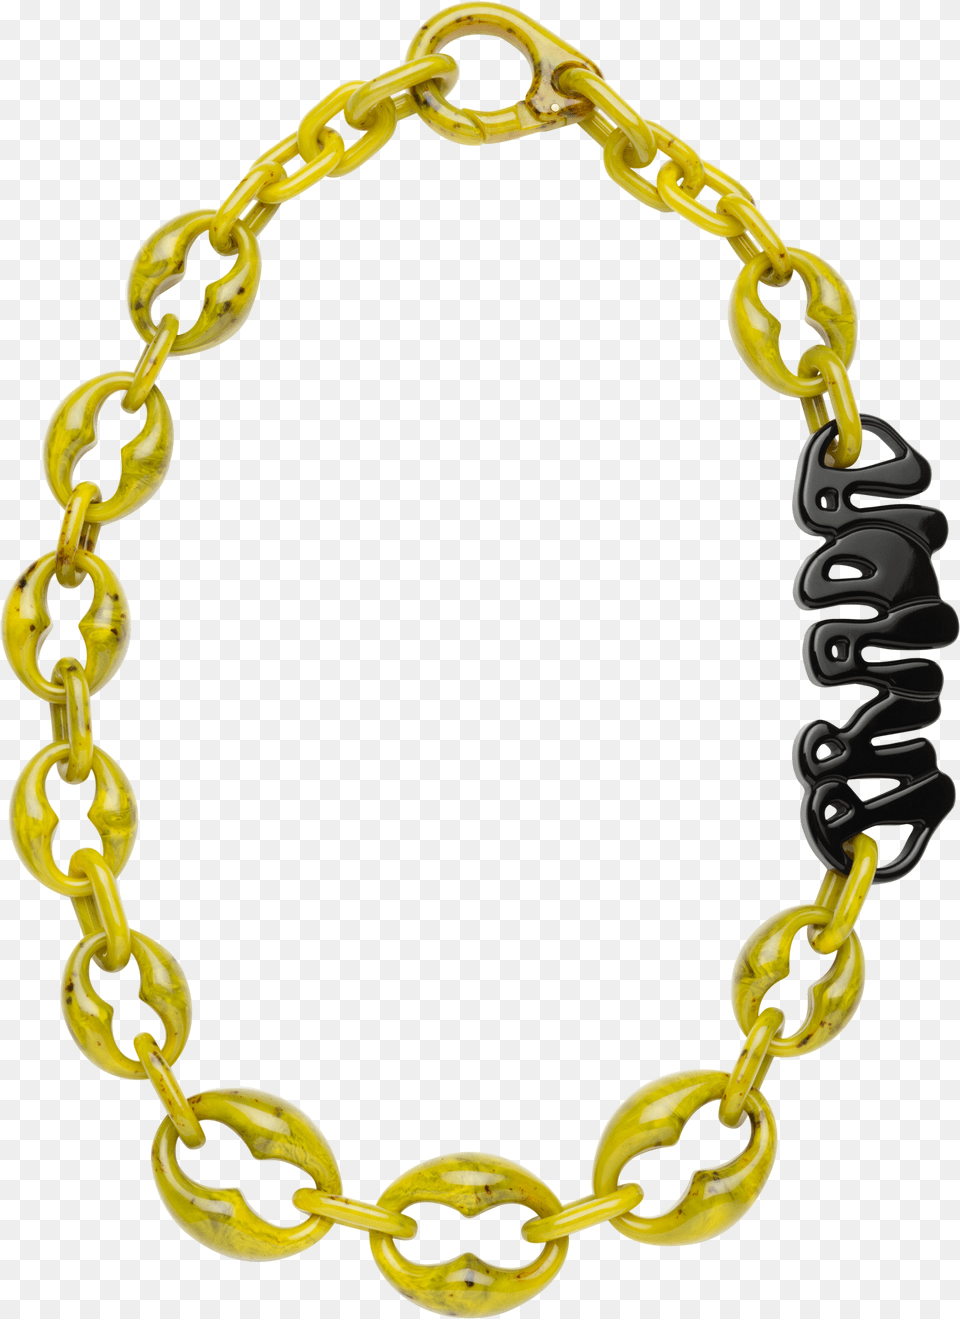 Prada Kette, Accessories, Bracelet, Jewelry, Necklace Free Png Download